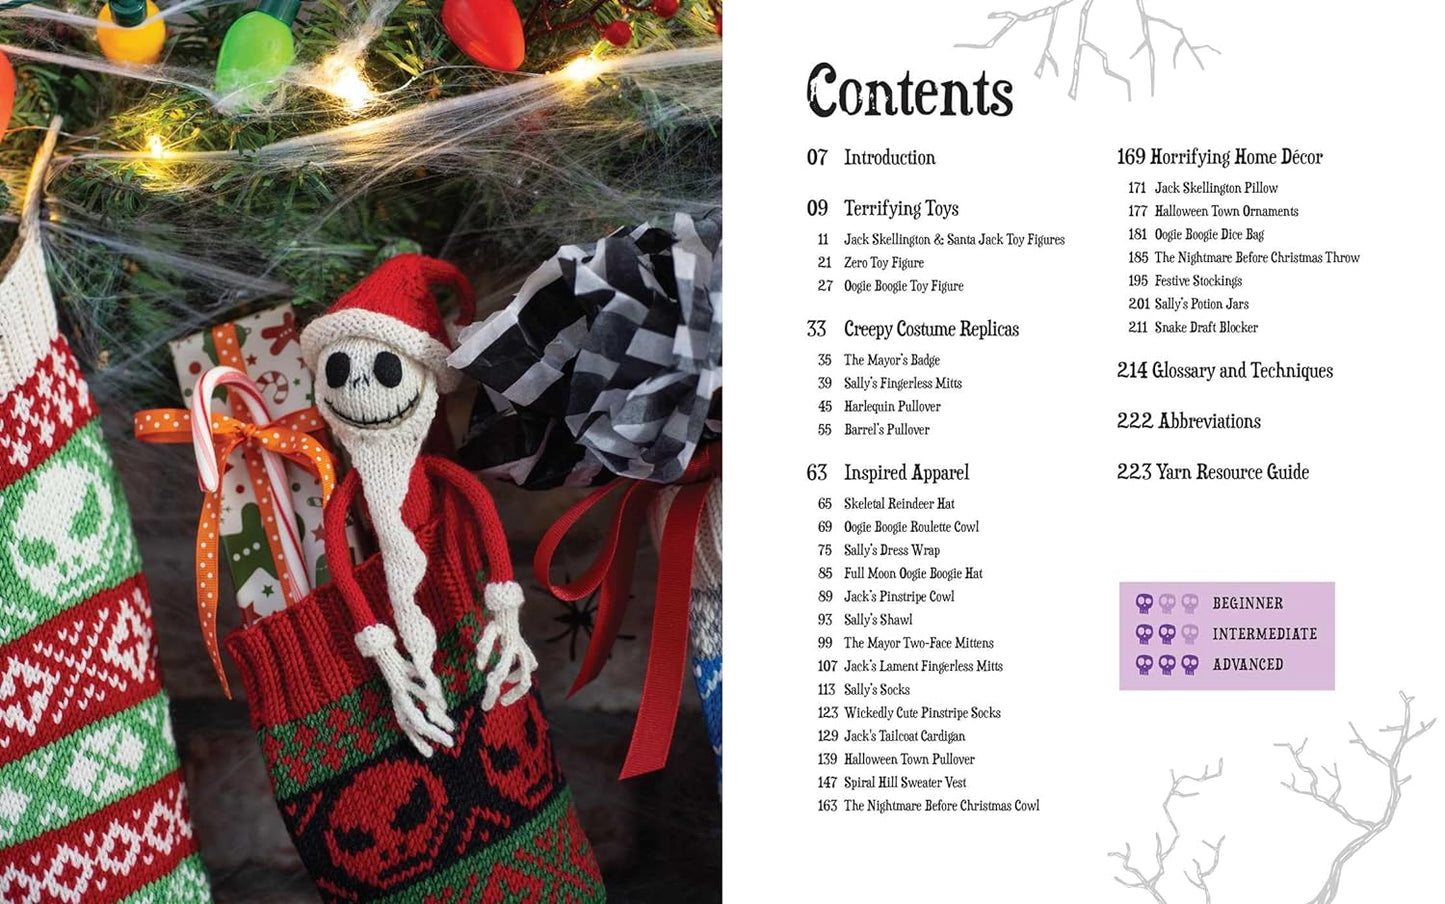 A two-page spread from the book. On the left are christmas stockings, decorated with halloween images. A knit figure of Jack Skellington dressed as santa claus sits in one stocking. On the right is the book's table of contents.